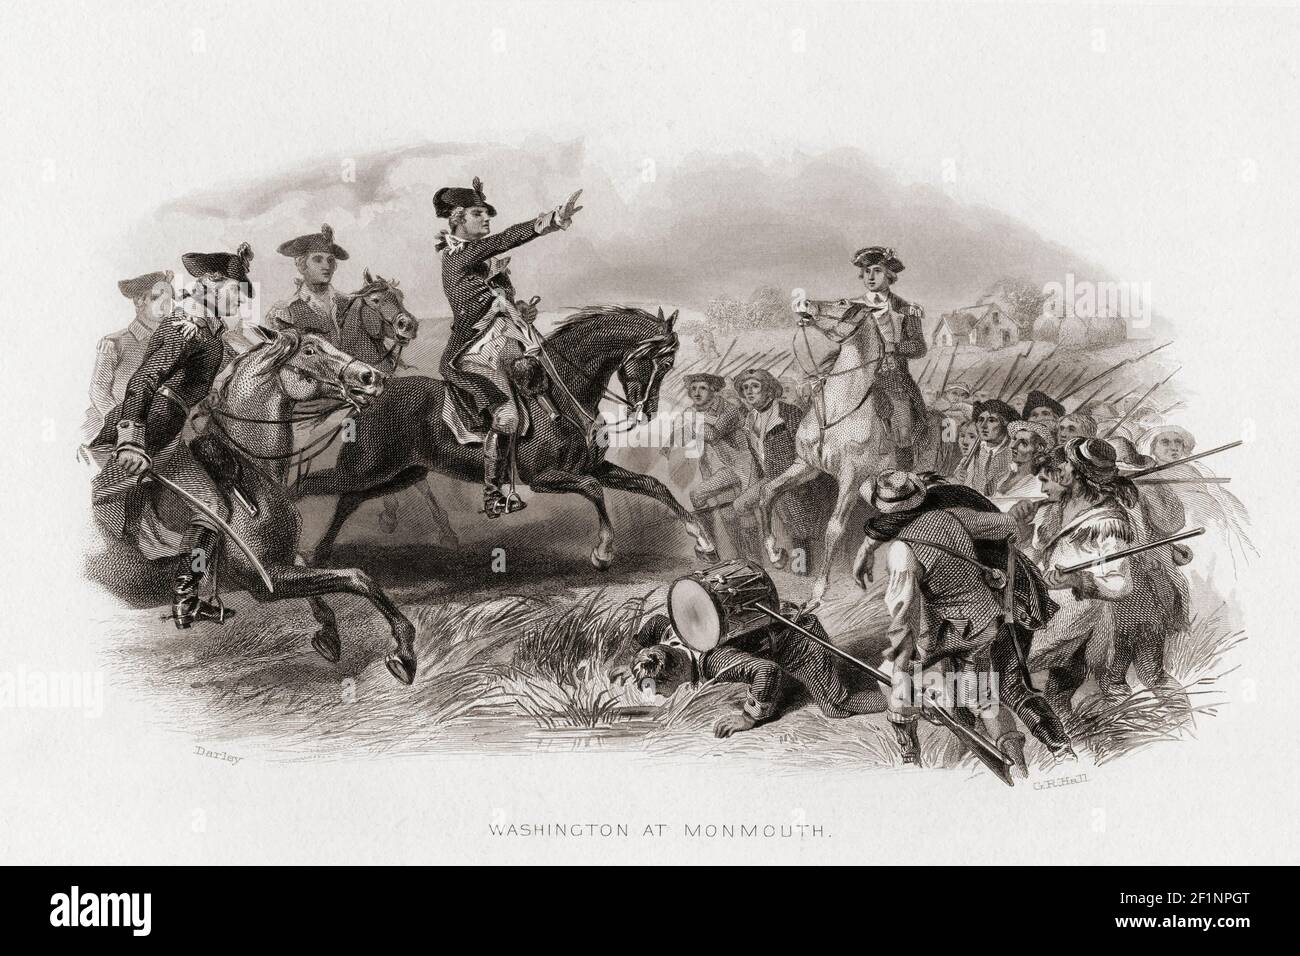 George Washington at the Battle of Monmouth, also known as the Battle of Monmouth Court House, June 28, 1778.  After an 1858 engraving by G.R. Hall from a work by Felix Octavius Carr Darley. Stock Photo